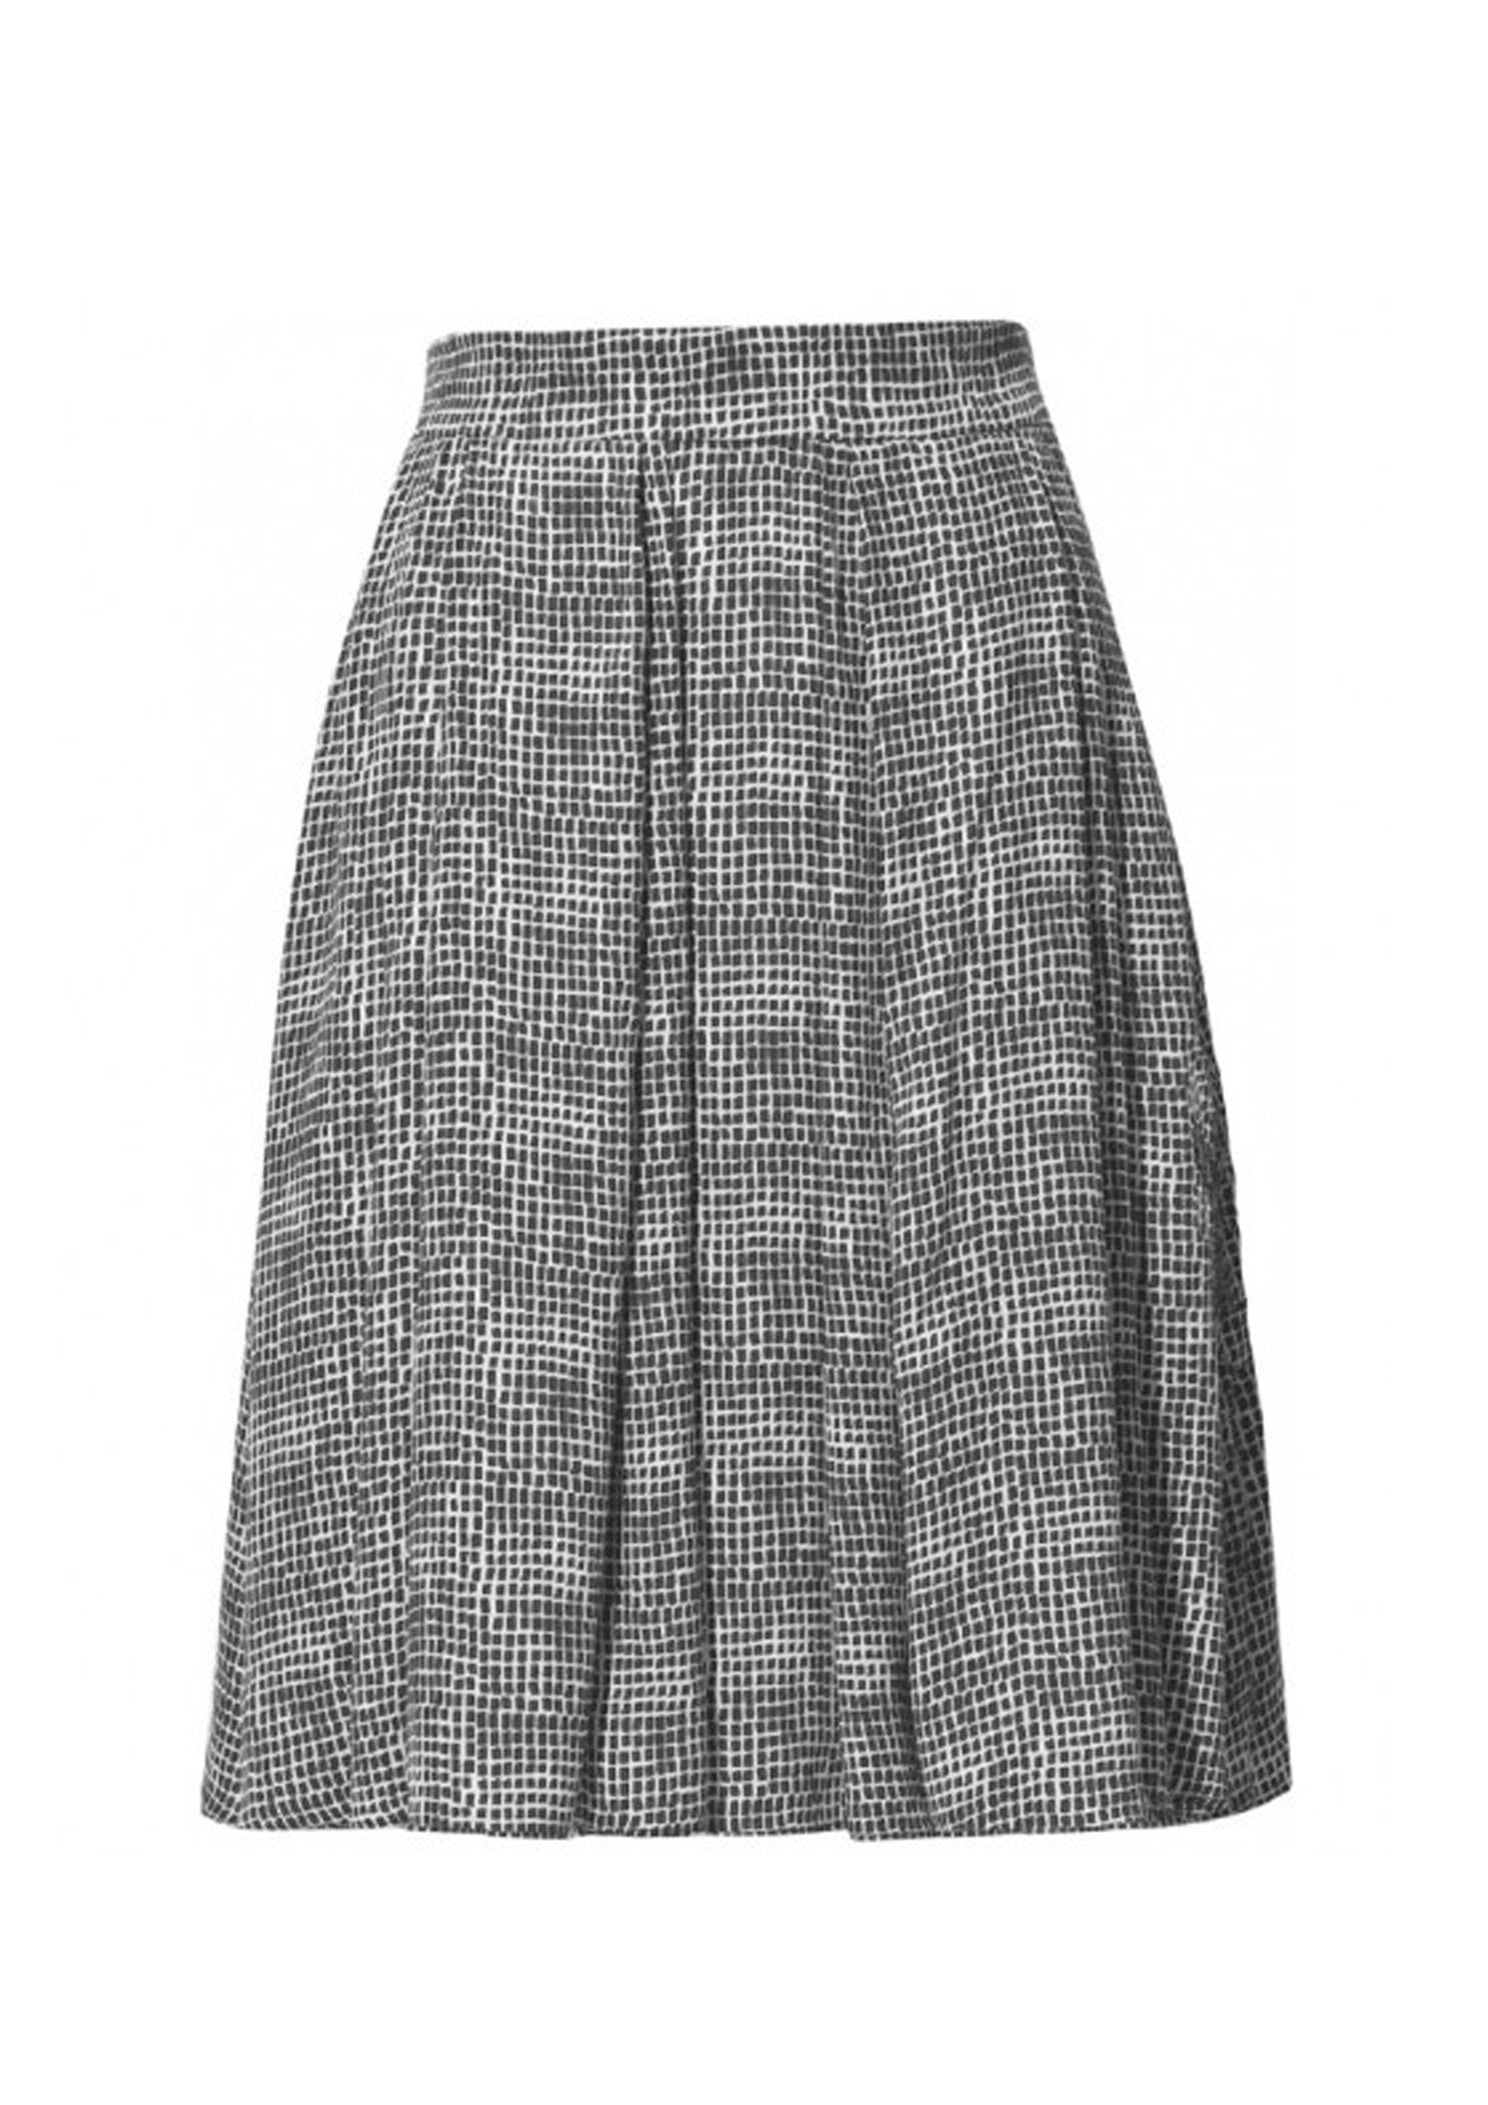 Two Pleat skirt